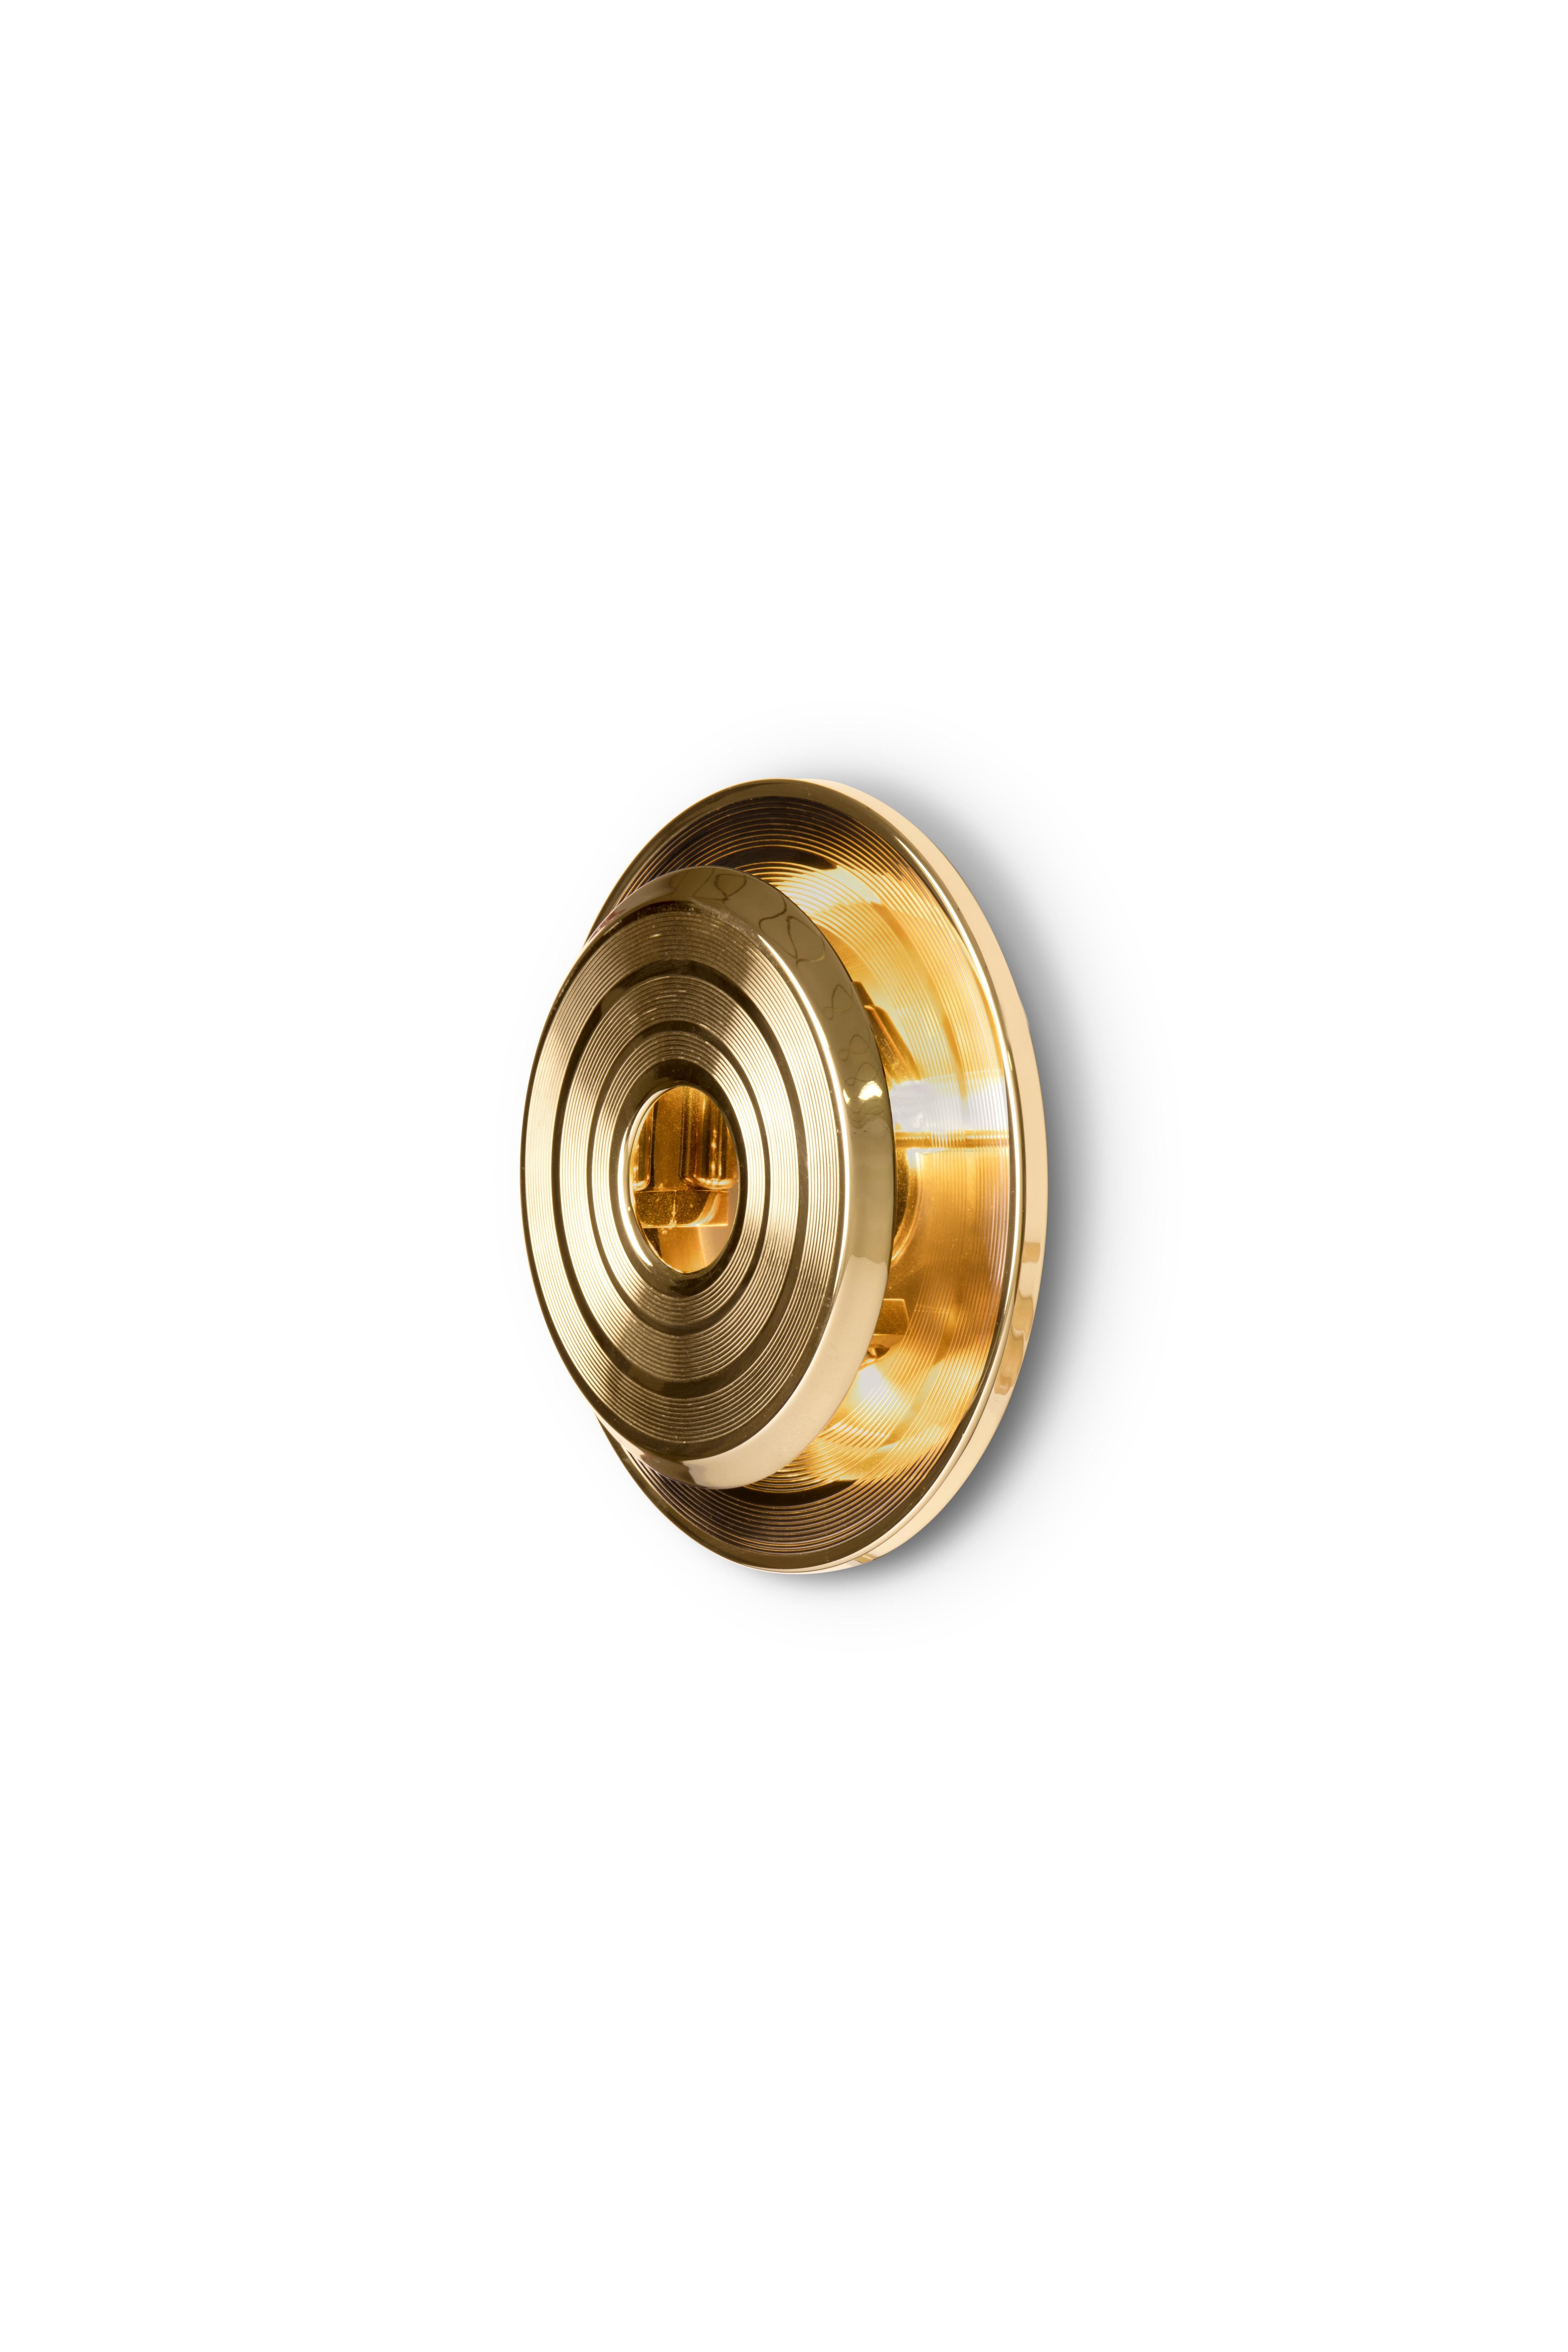 Hendrix wall sconce has a round shape that was inspired by a golden vinyl player. Ideal for every single Mid-Century Modern interior, this wall light fixture will bring a smooth lighting effect to your room. 100% handmade in brass, Hendrix showcases